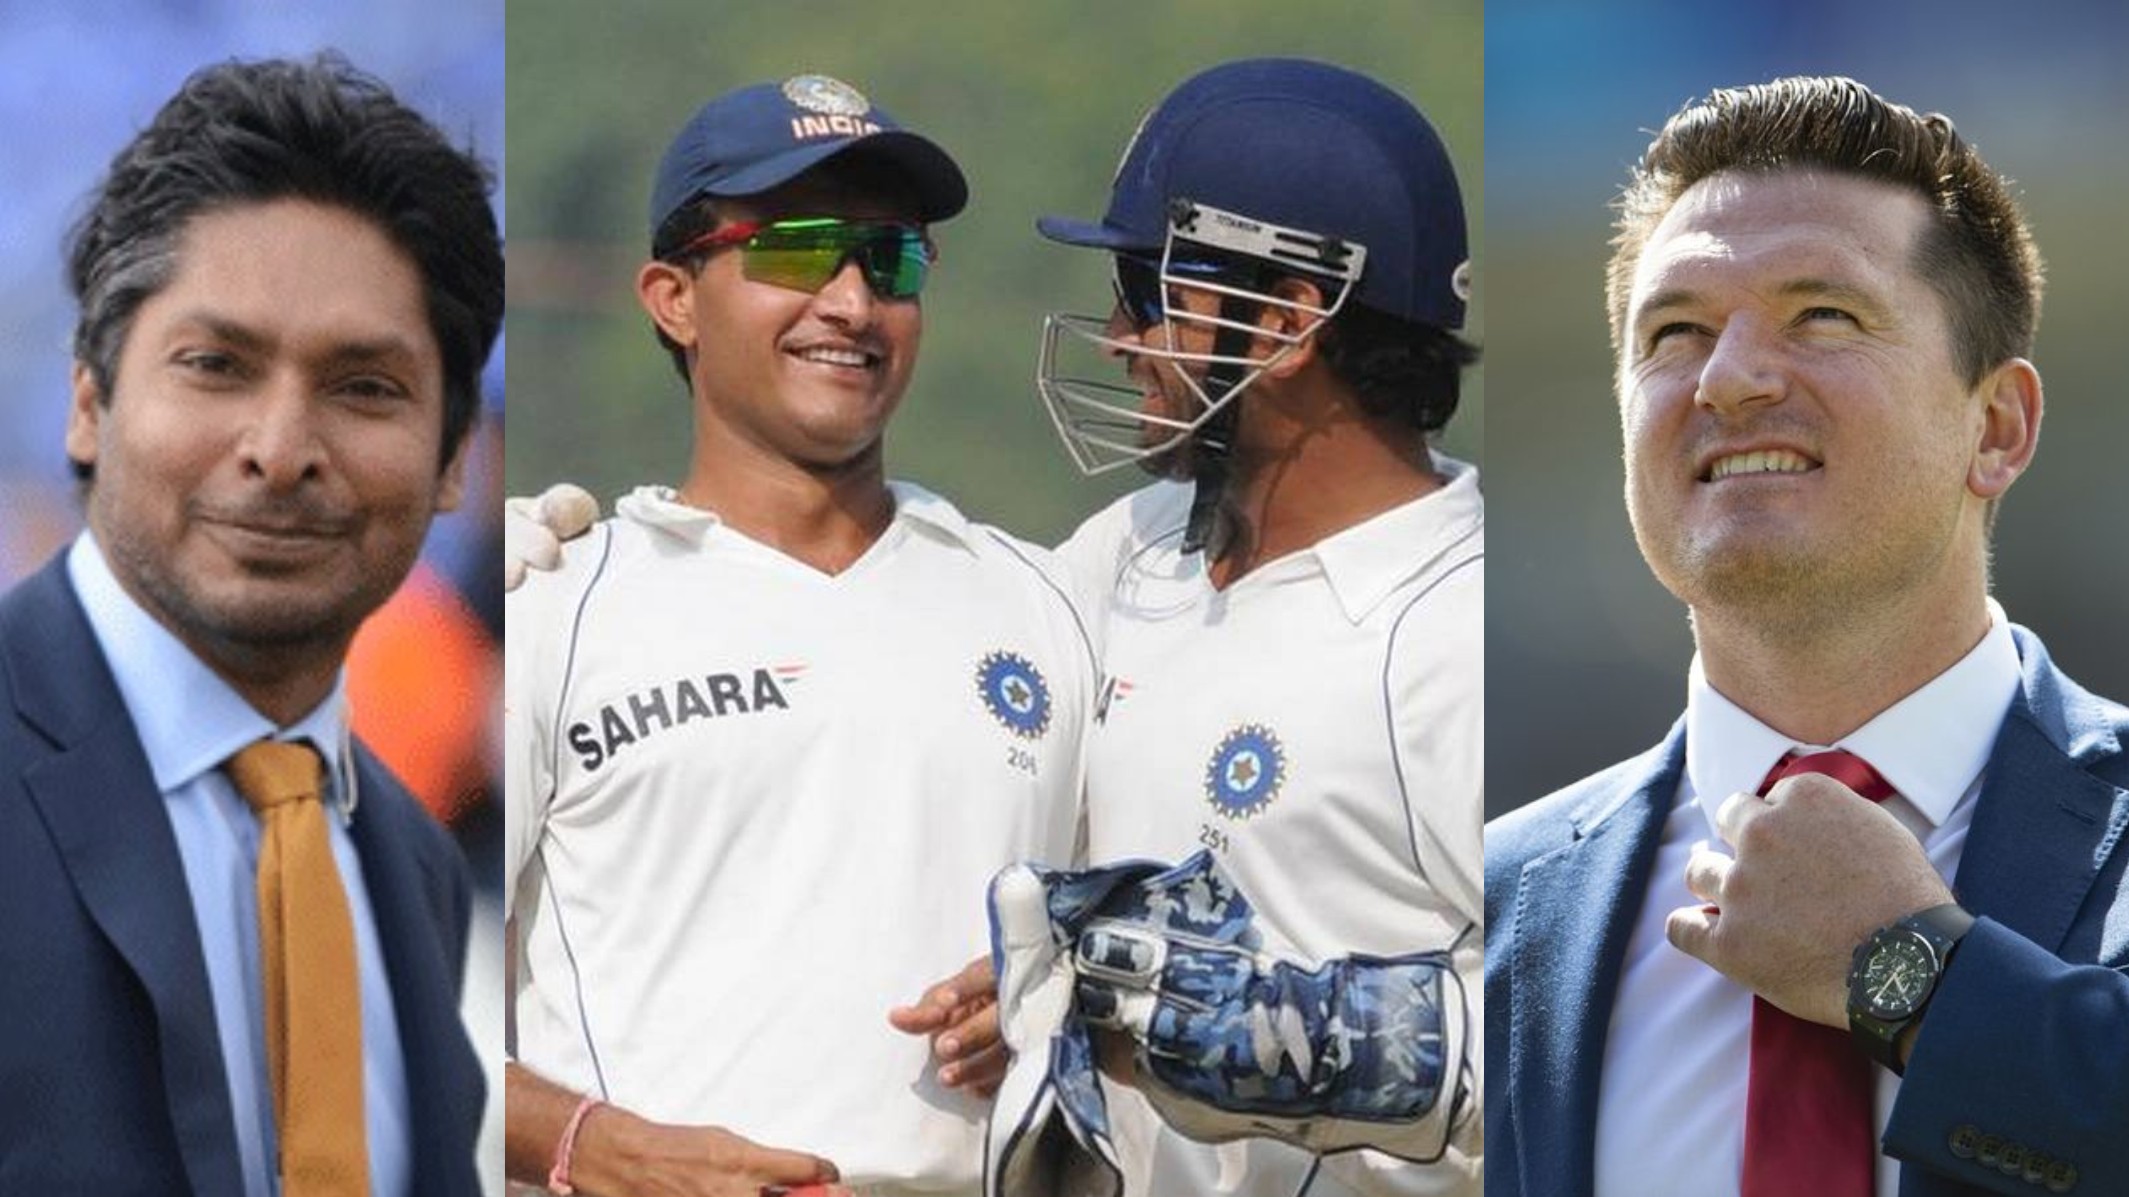 Graeme Smith says MS Dhoni got on with everyone; Sangakkara praises Ganguly's knowledge of the game